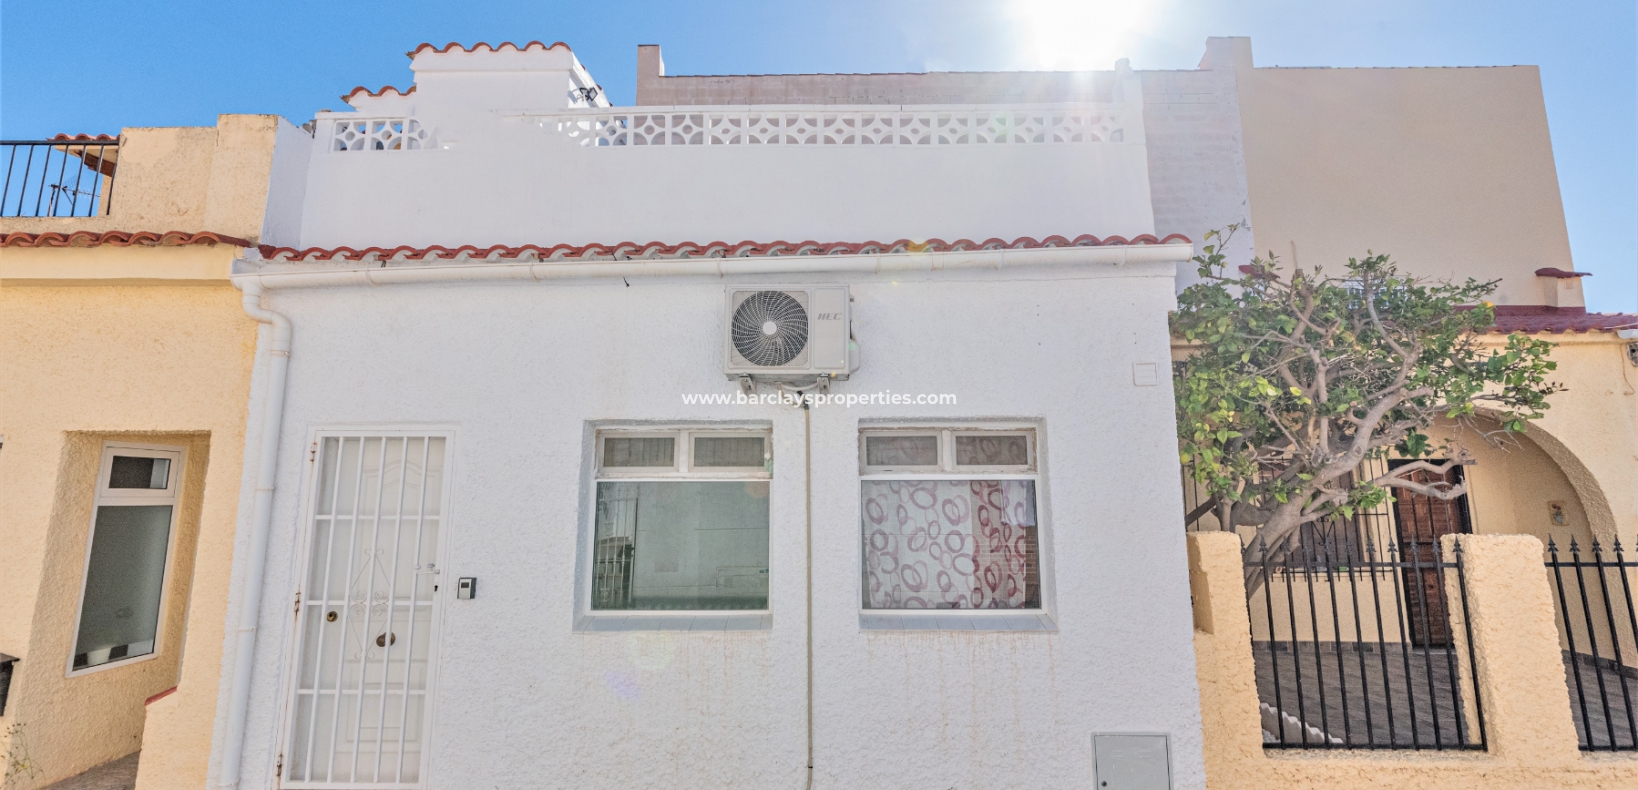 Property For Sale In The Costa Blanca, Spain